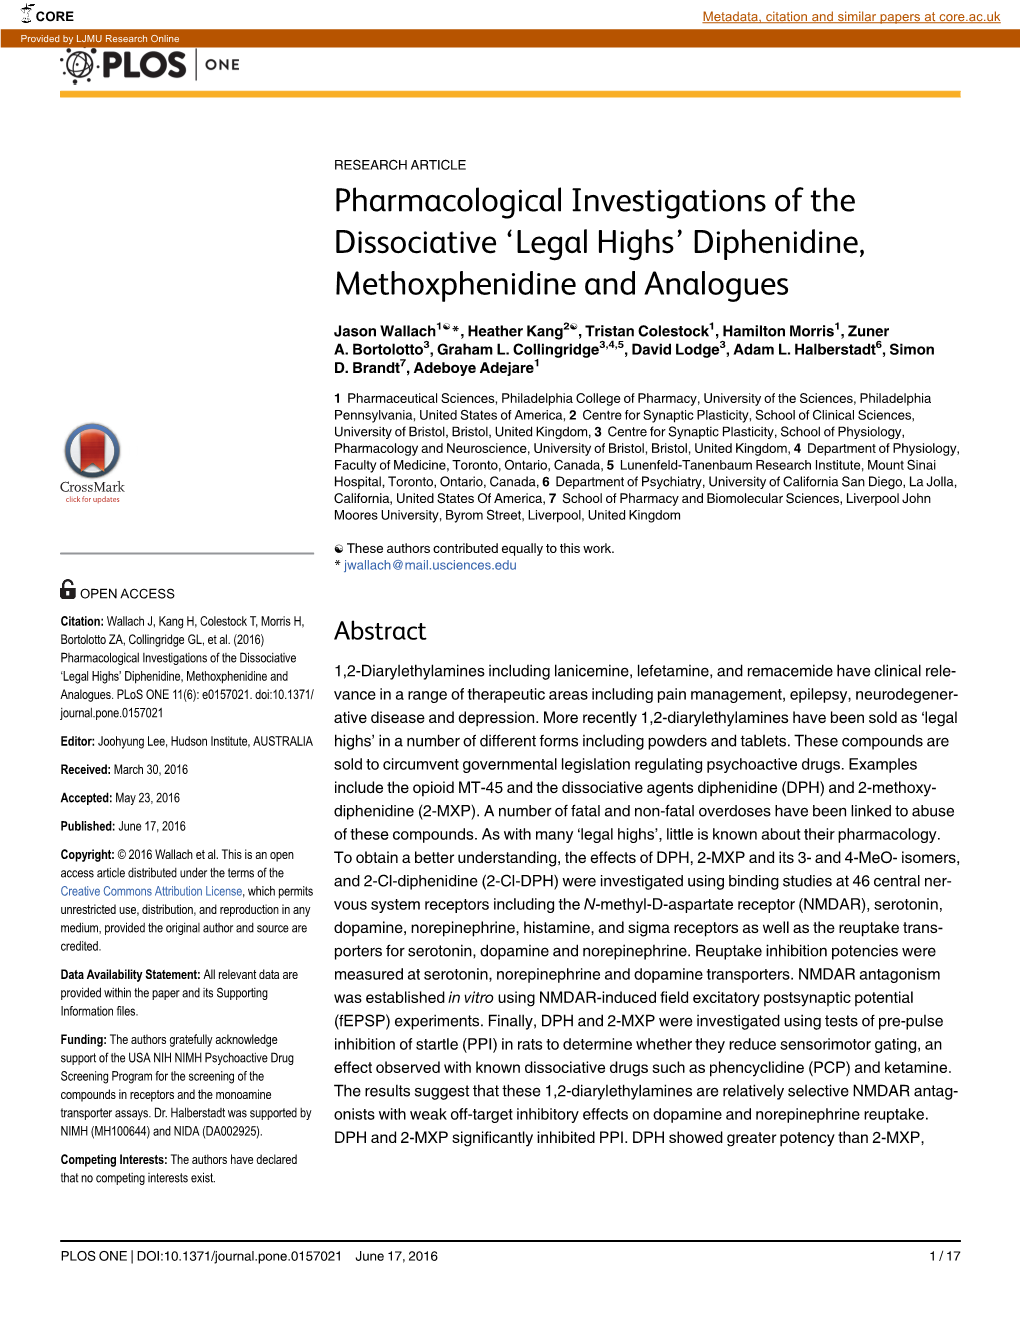 Pharmacological Investigations of the Dissociative 'Legal Highs